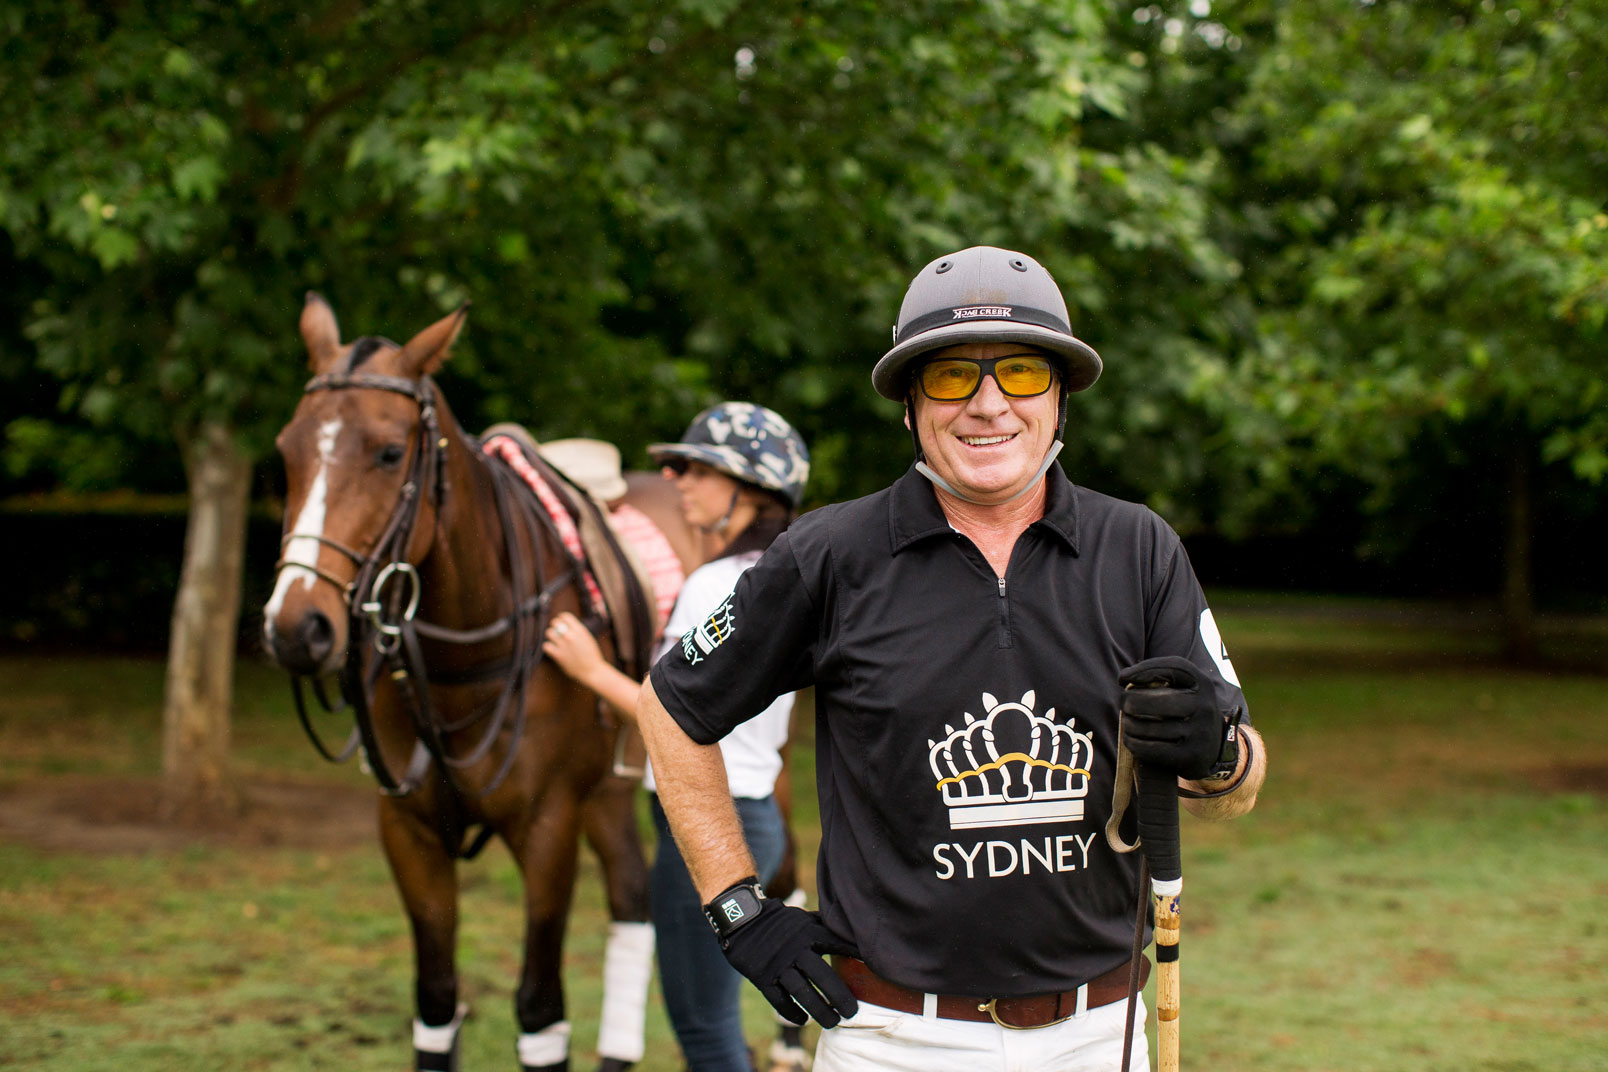 The Gold Cup at Sydney Polo Club